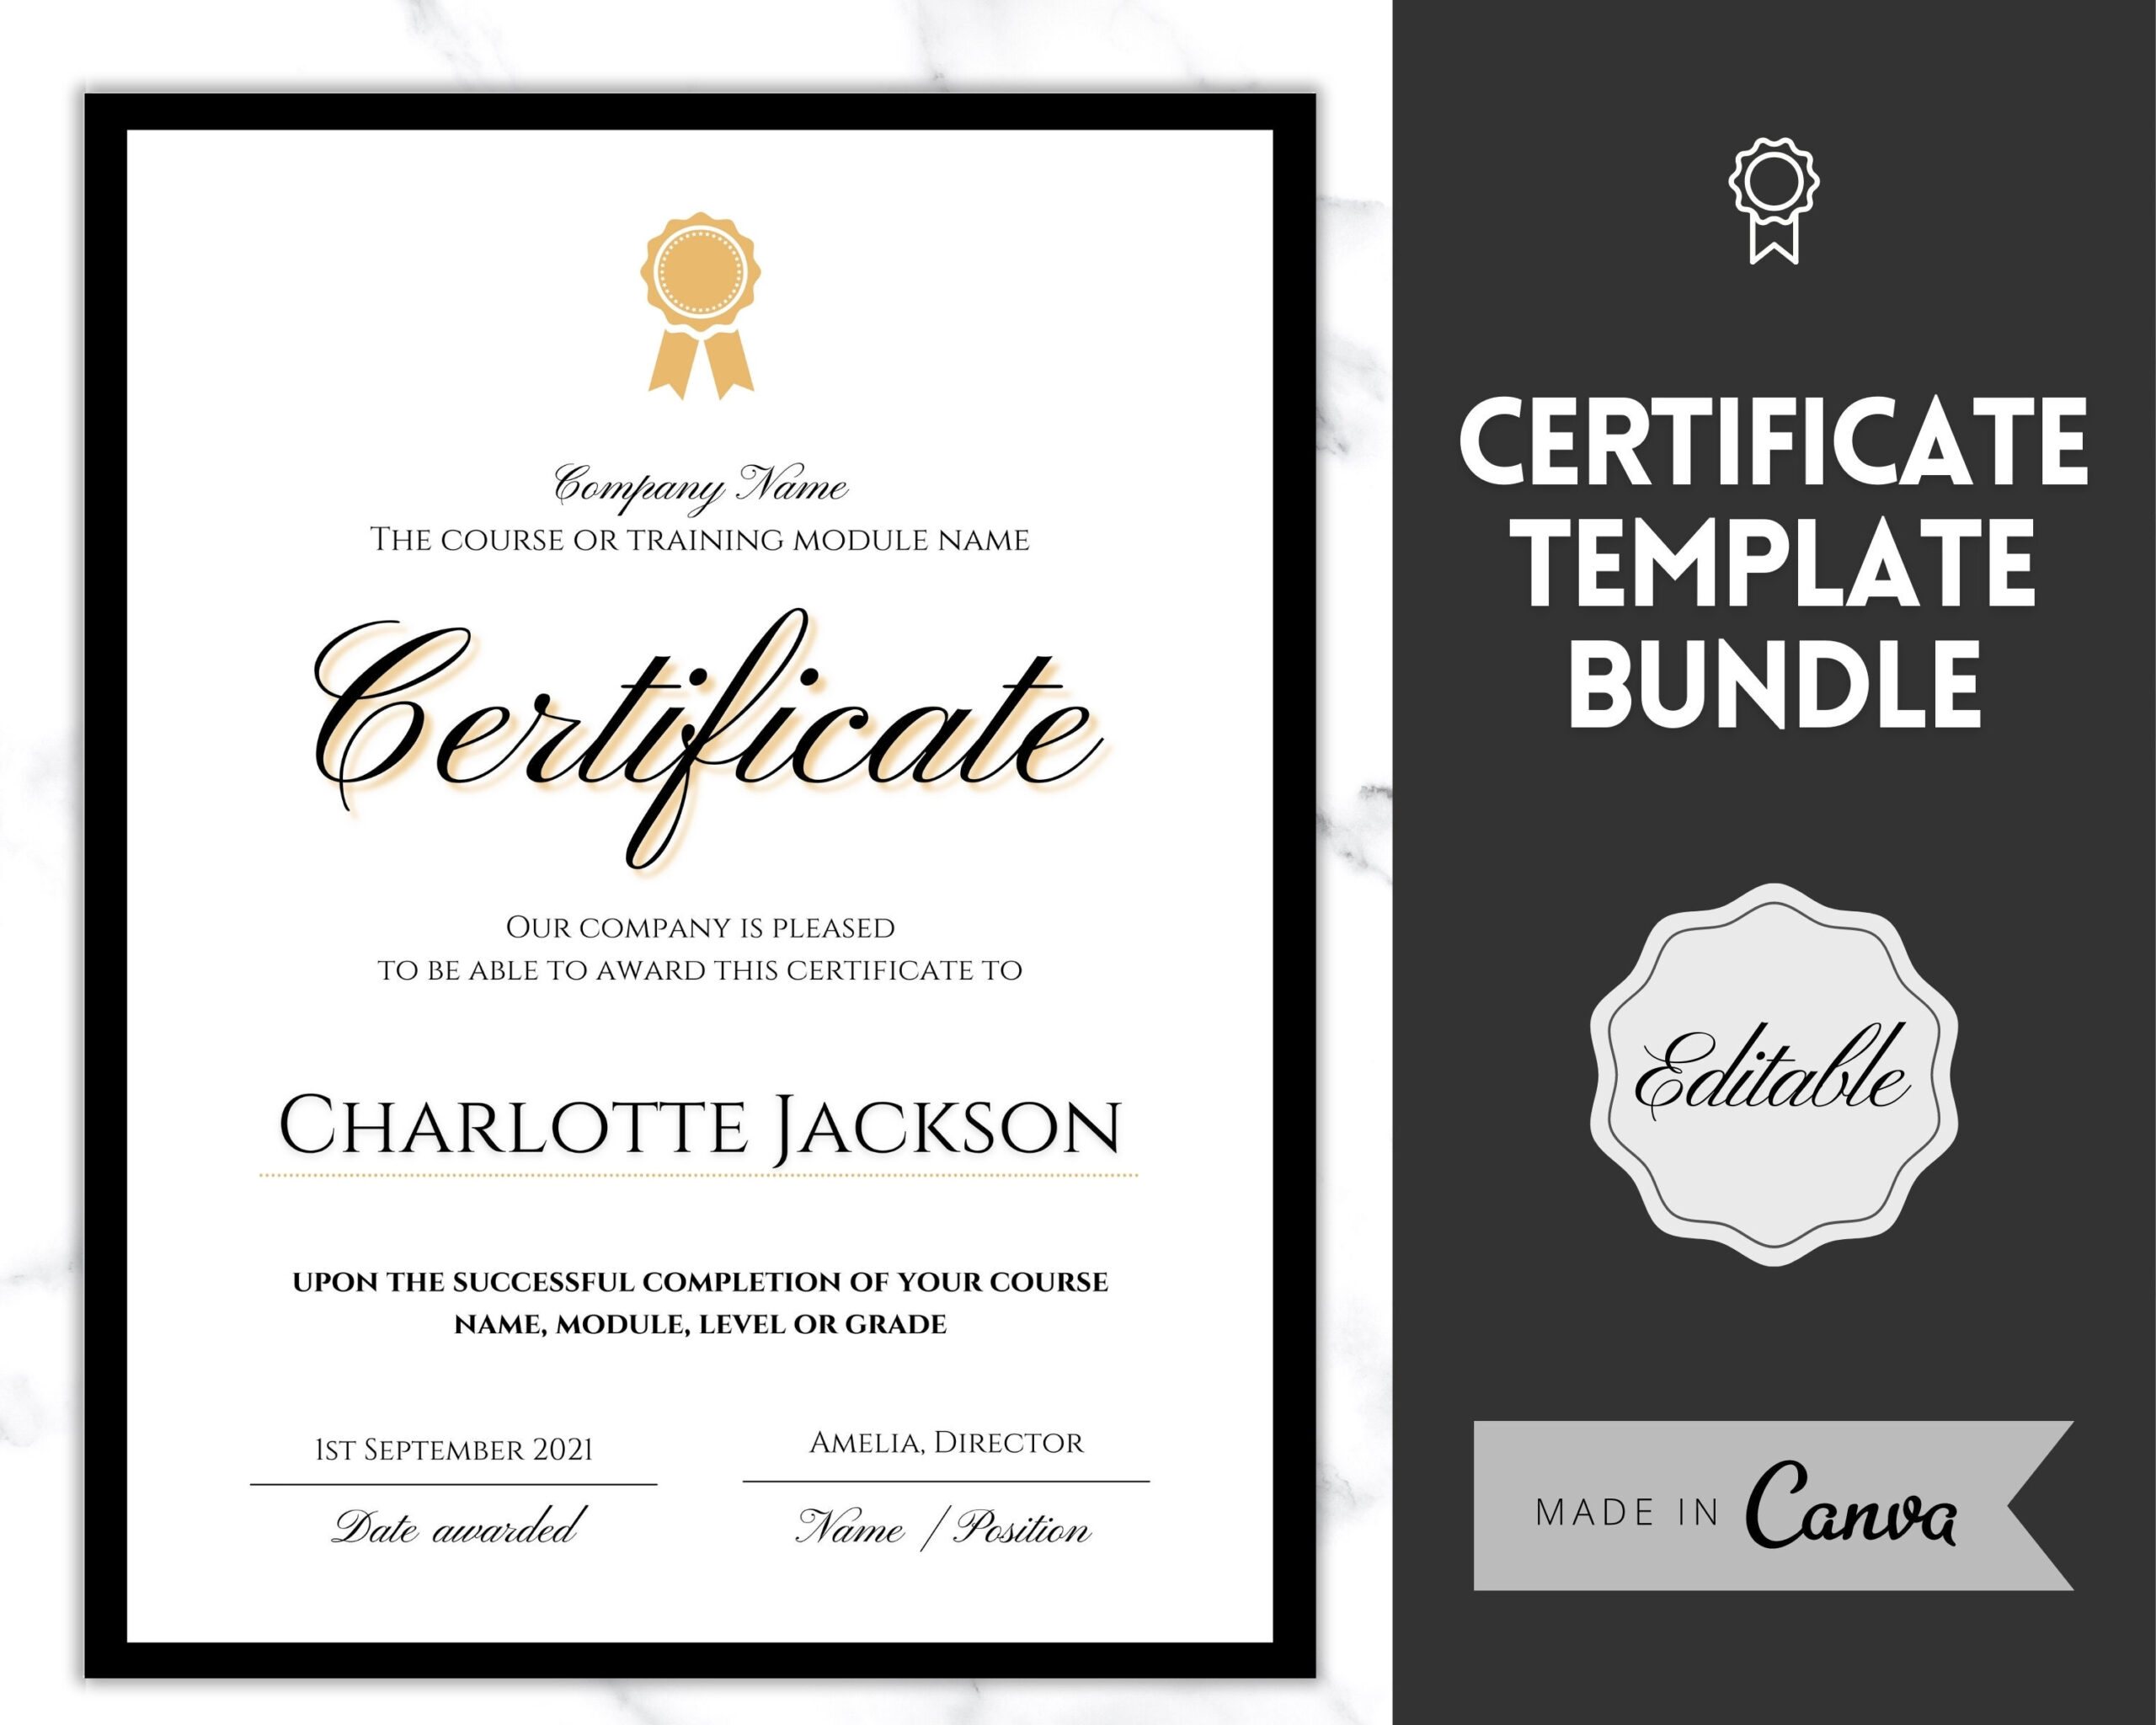 Editable Certificate Template Certificate of Completion - Etsy